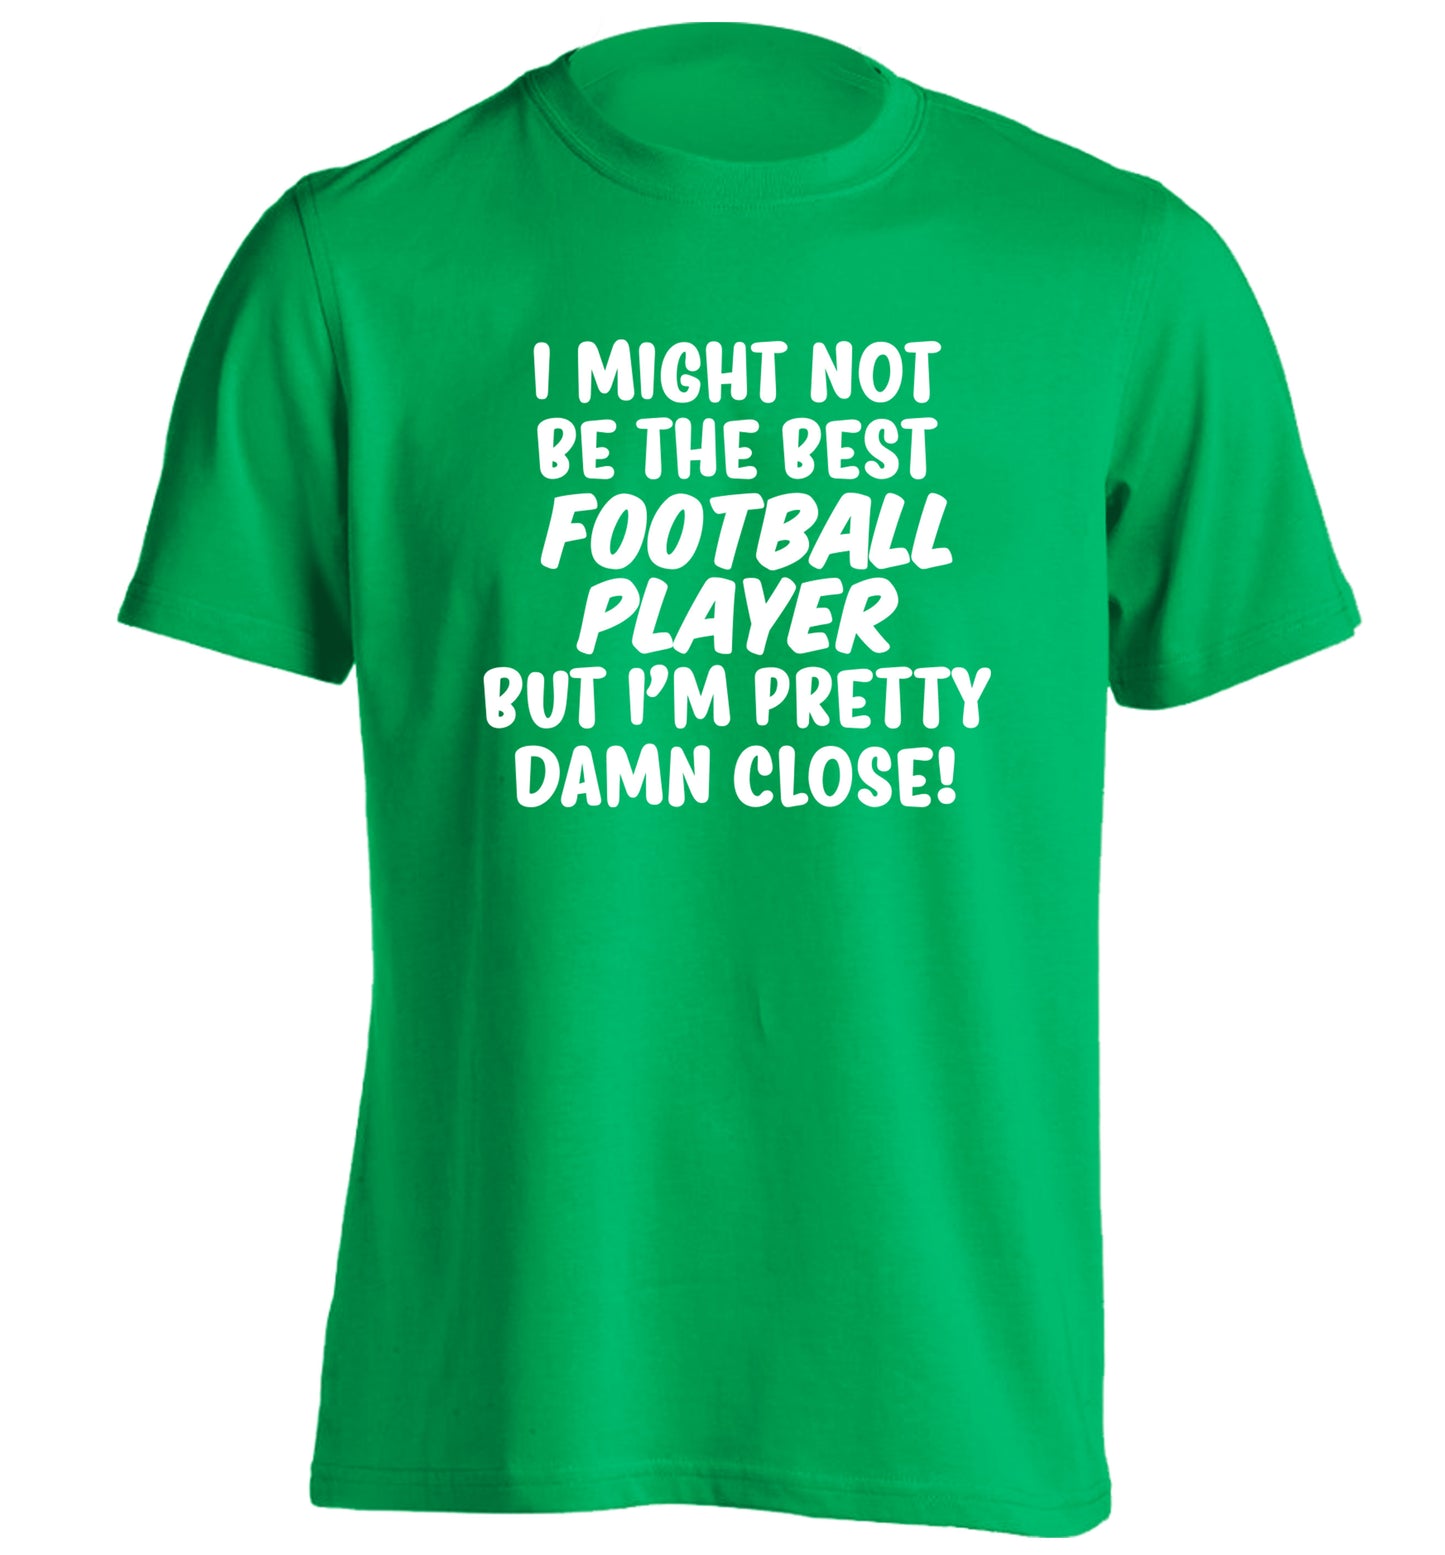 I might not be the best football player but I'm pretty close! adults unisexgreen Tshirt 2XL